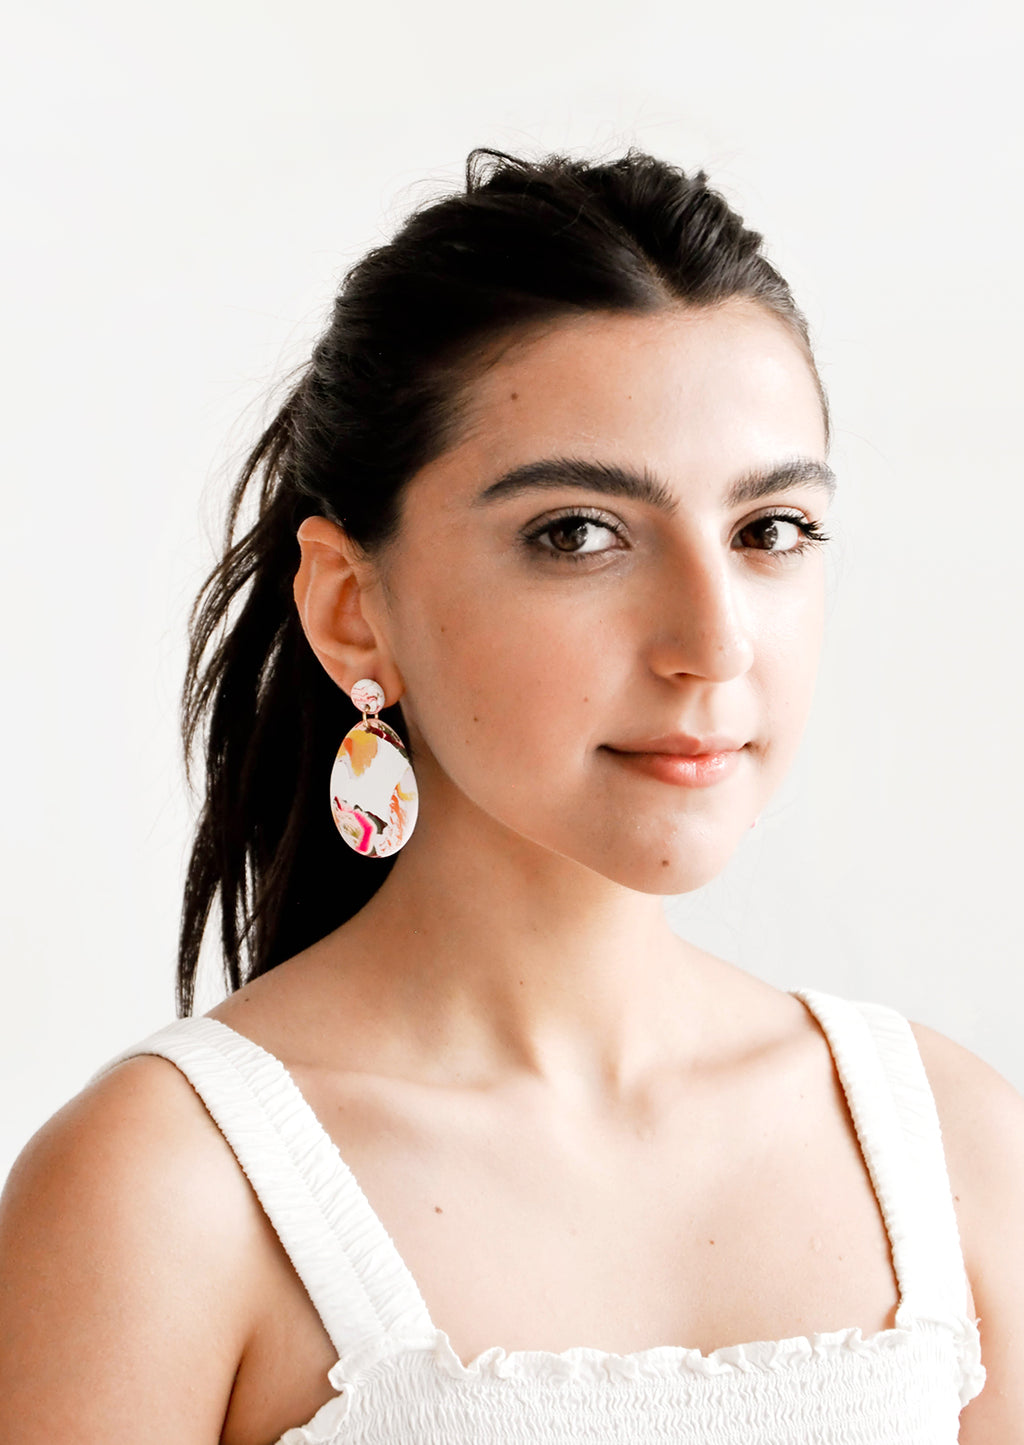 2: Model shot of woman wearing earrings and a white top.